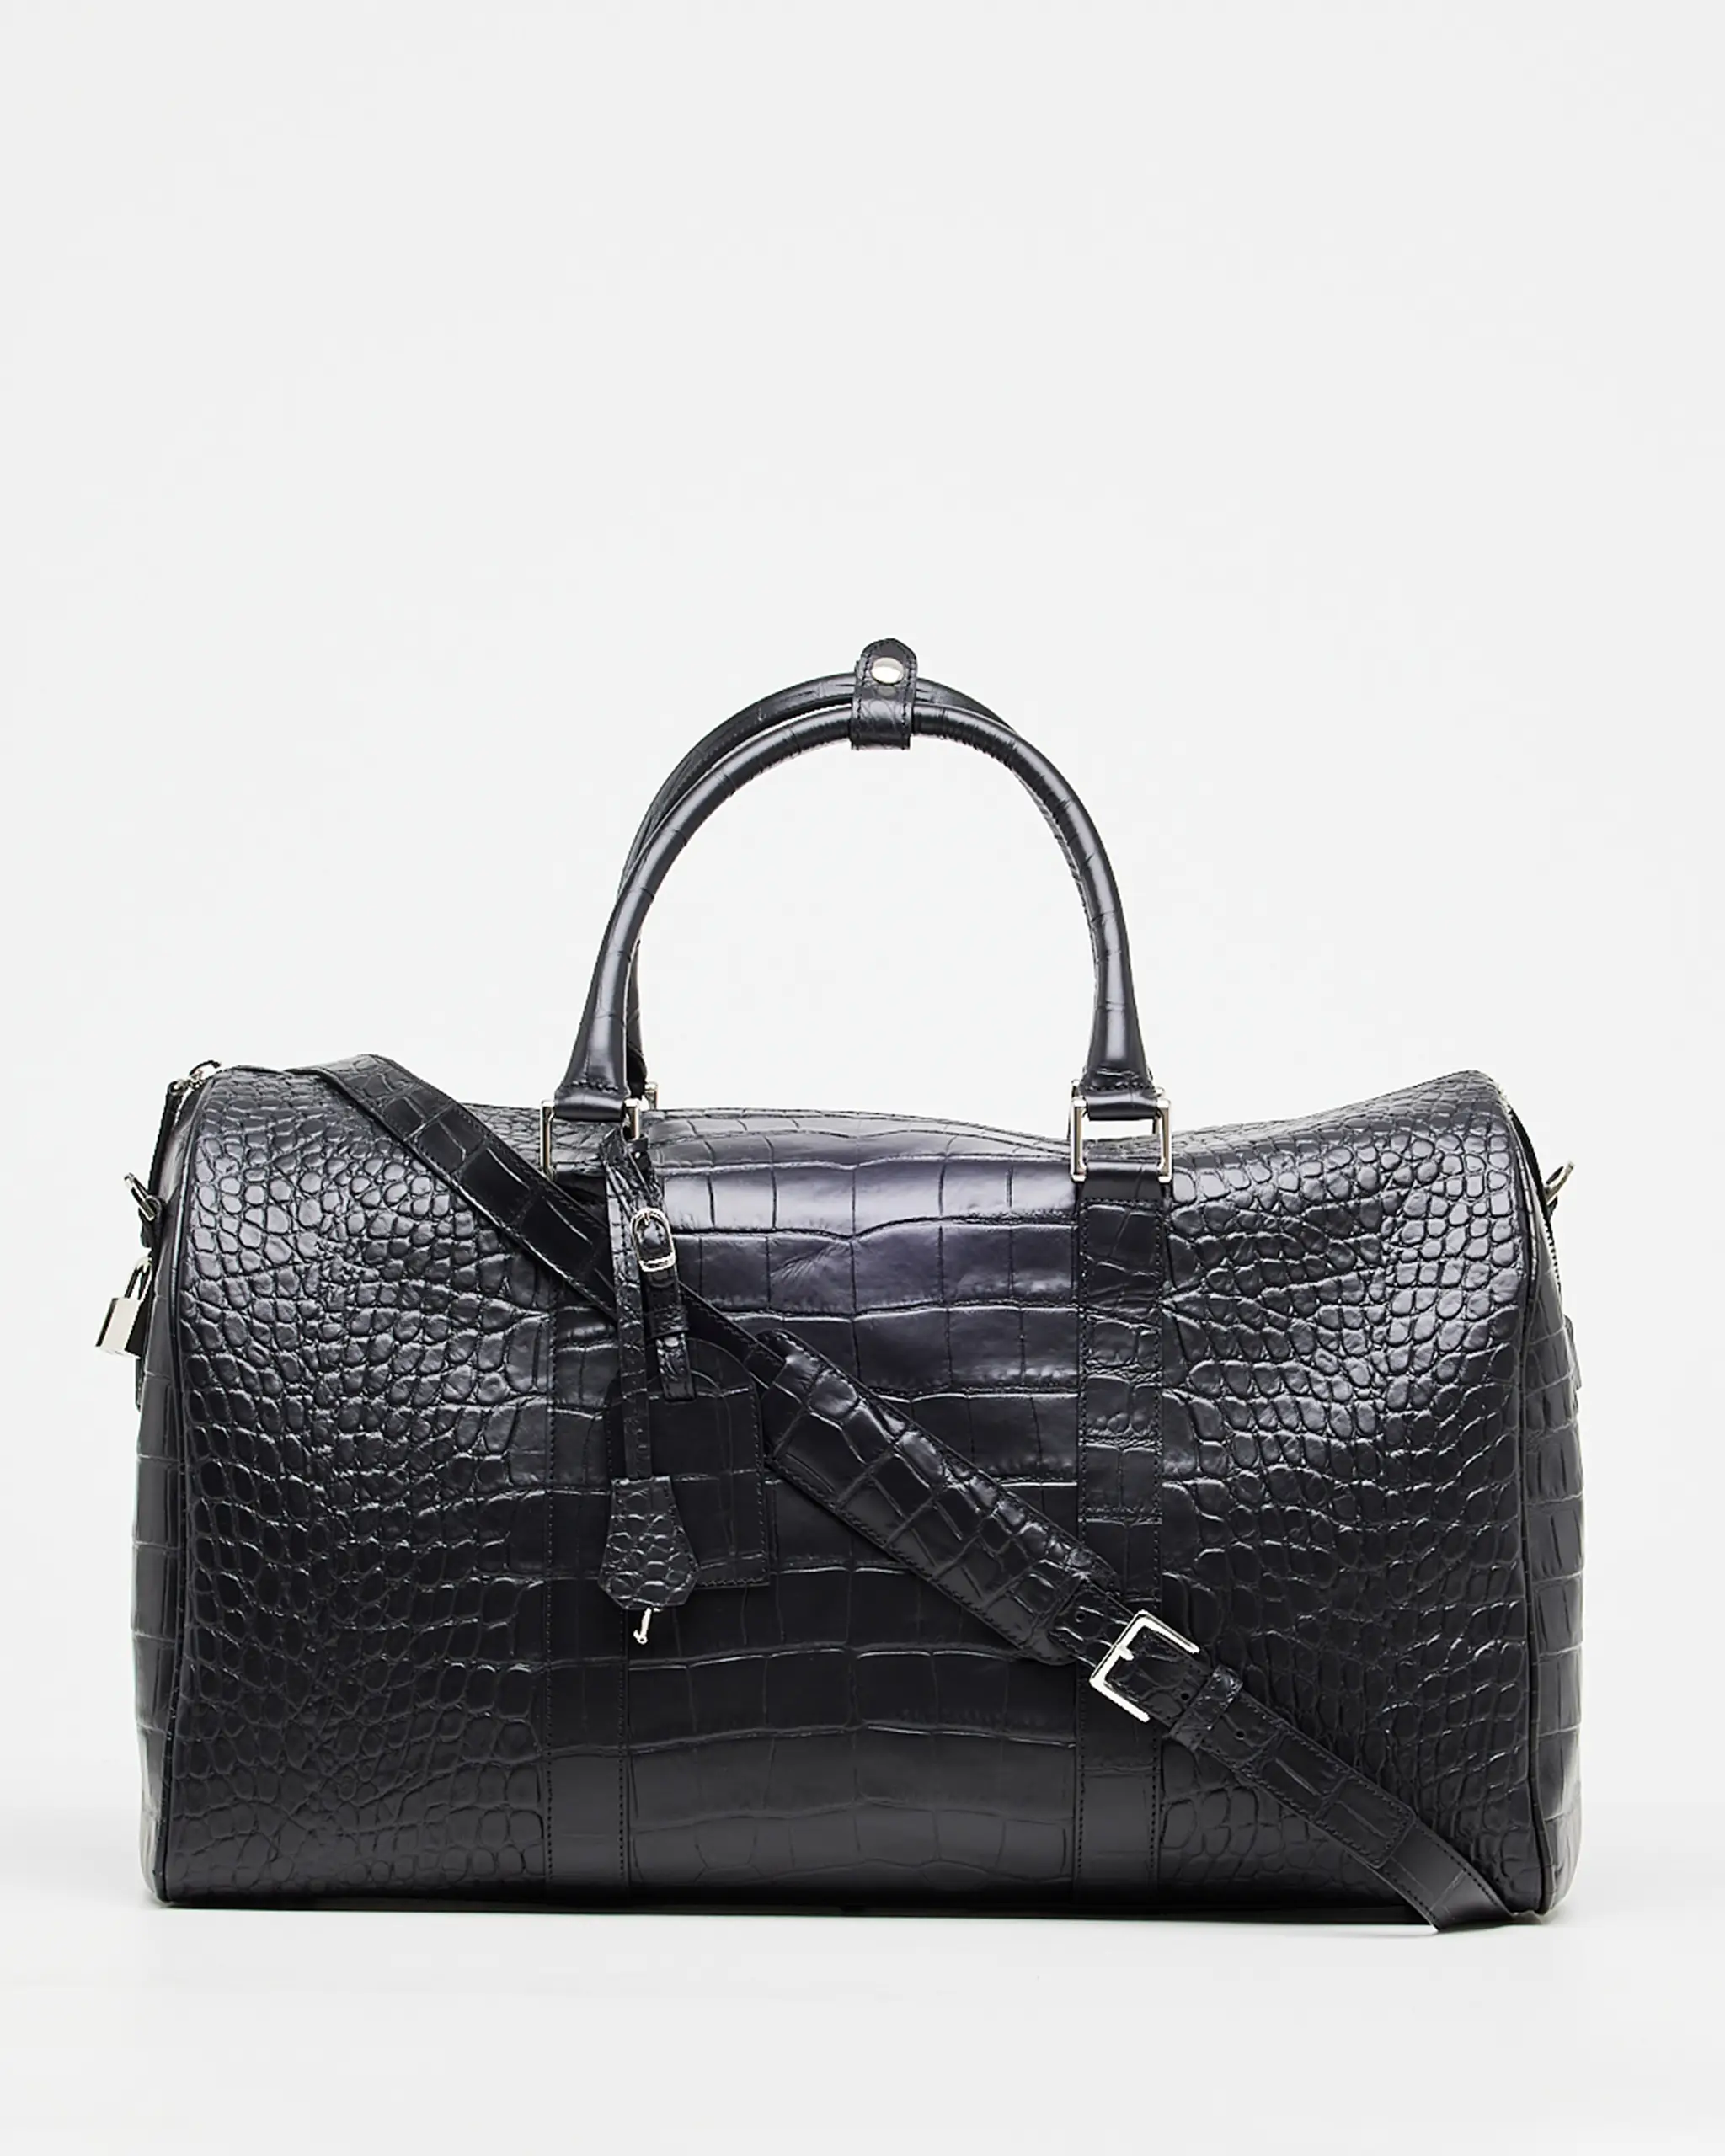 This stunning leather weekend travel bag is perfect for your next getaway. It features a Croco print that adds a touch of luxury and elegance. The roomy interior is perfect for packing all your essentials, and the adjustable strap makes it easy to carry. This classy duffle bag handmade in Italy with Tuscany calf leather and high-quality materials is completed with zipped compartments and card pockets.